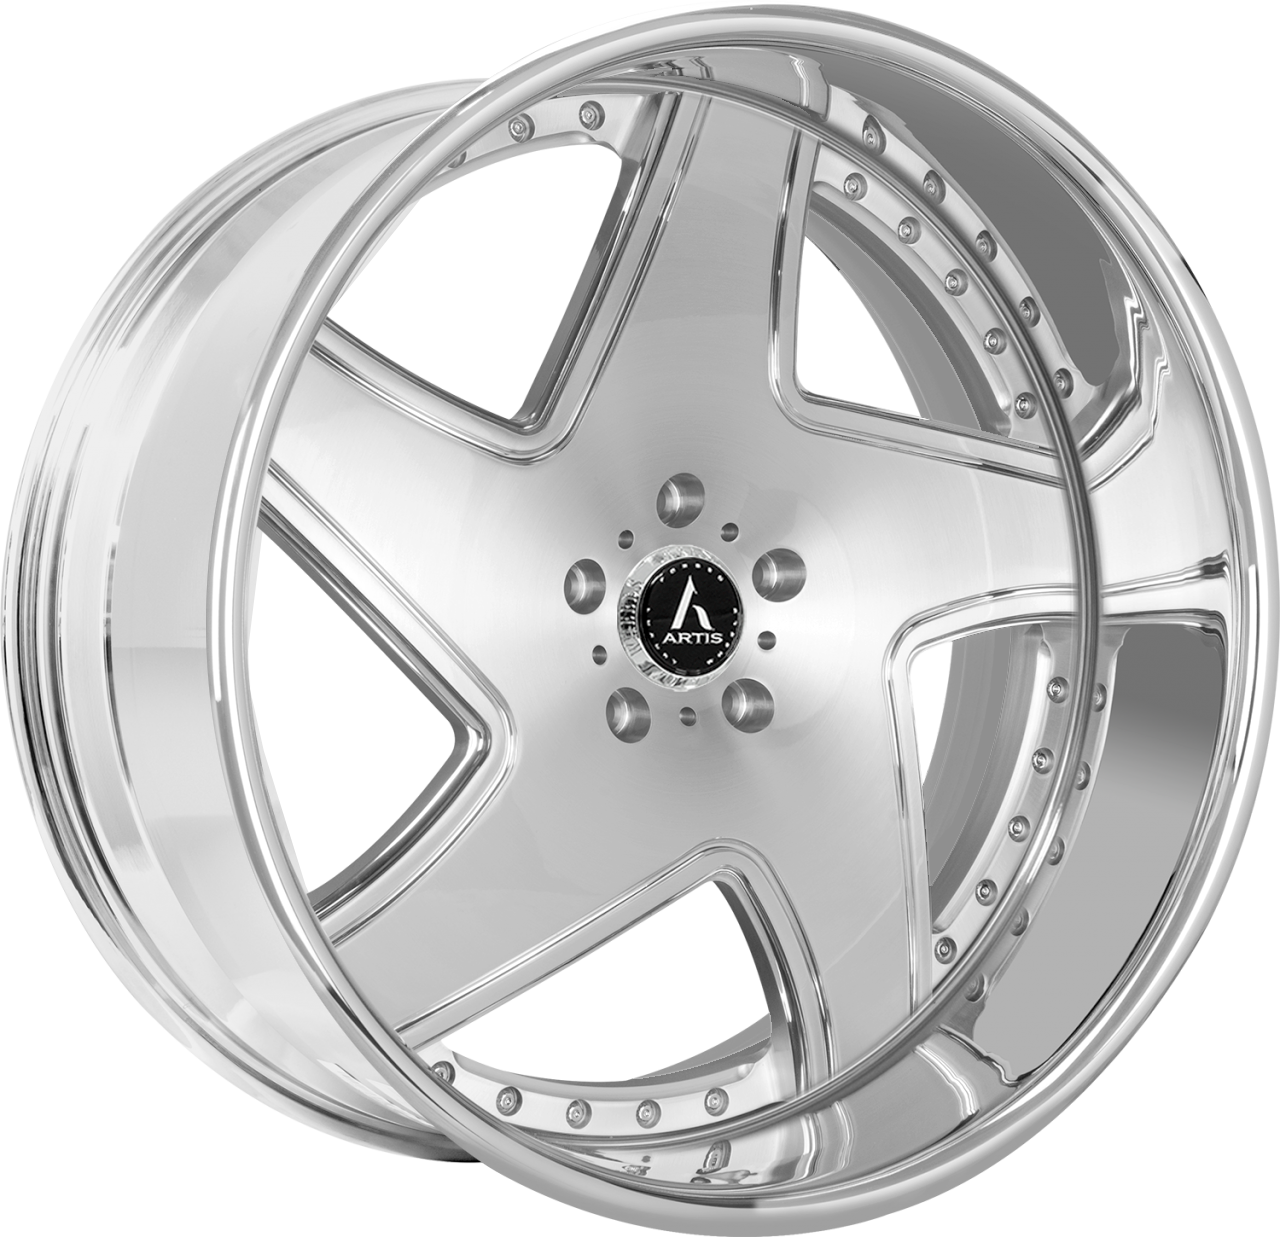 Artis Forged Dawn-M wheel with Brushed finish